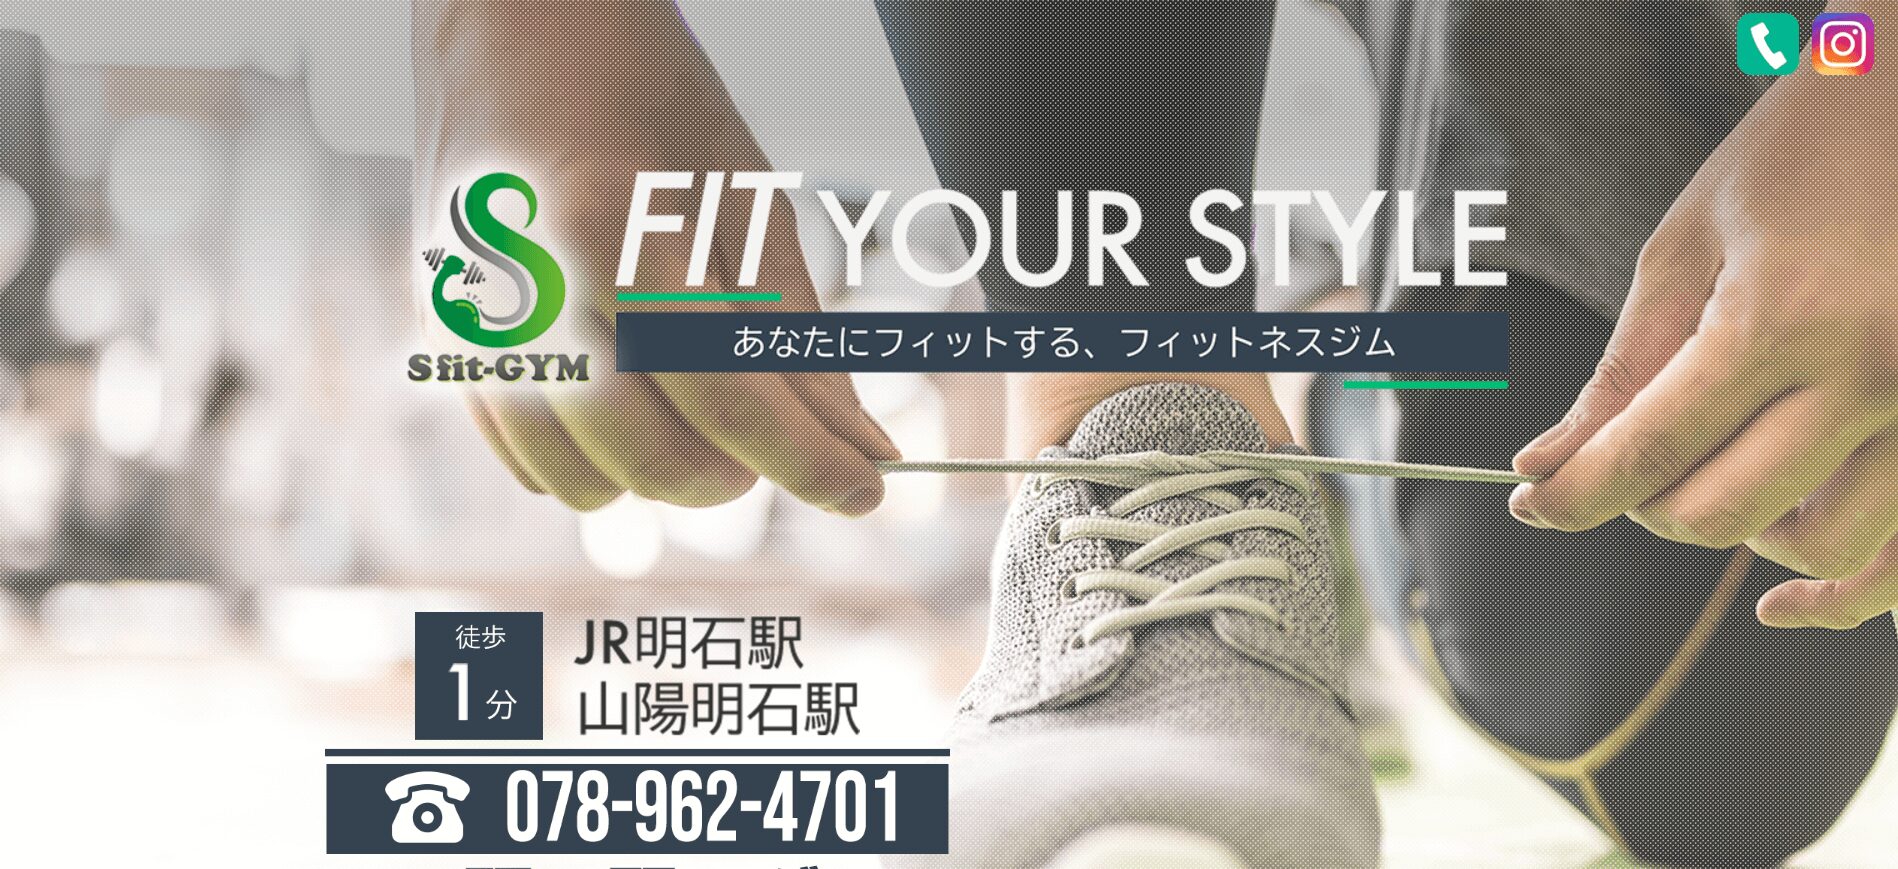 S fit-GYM